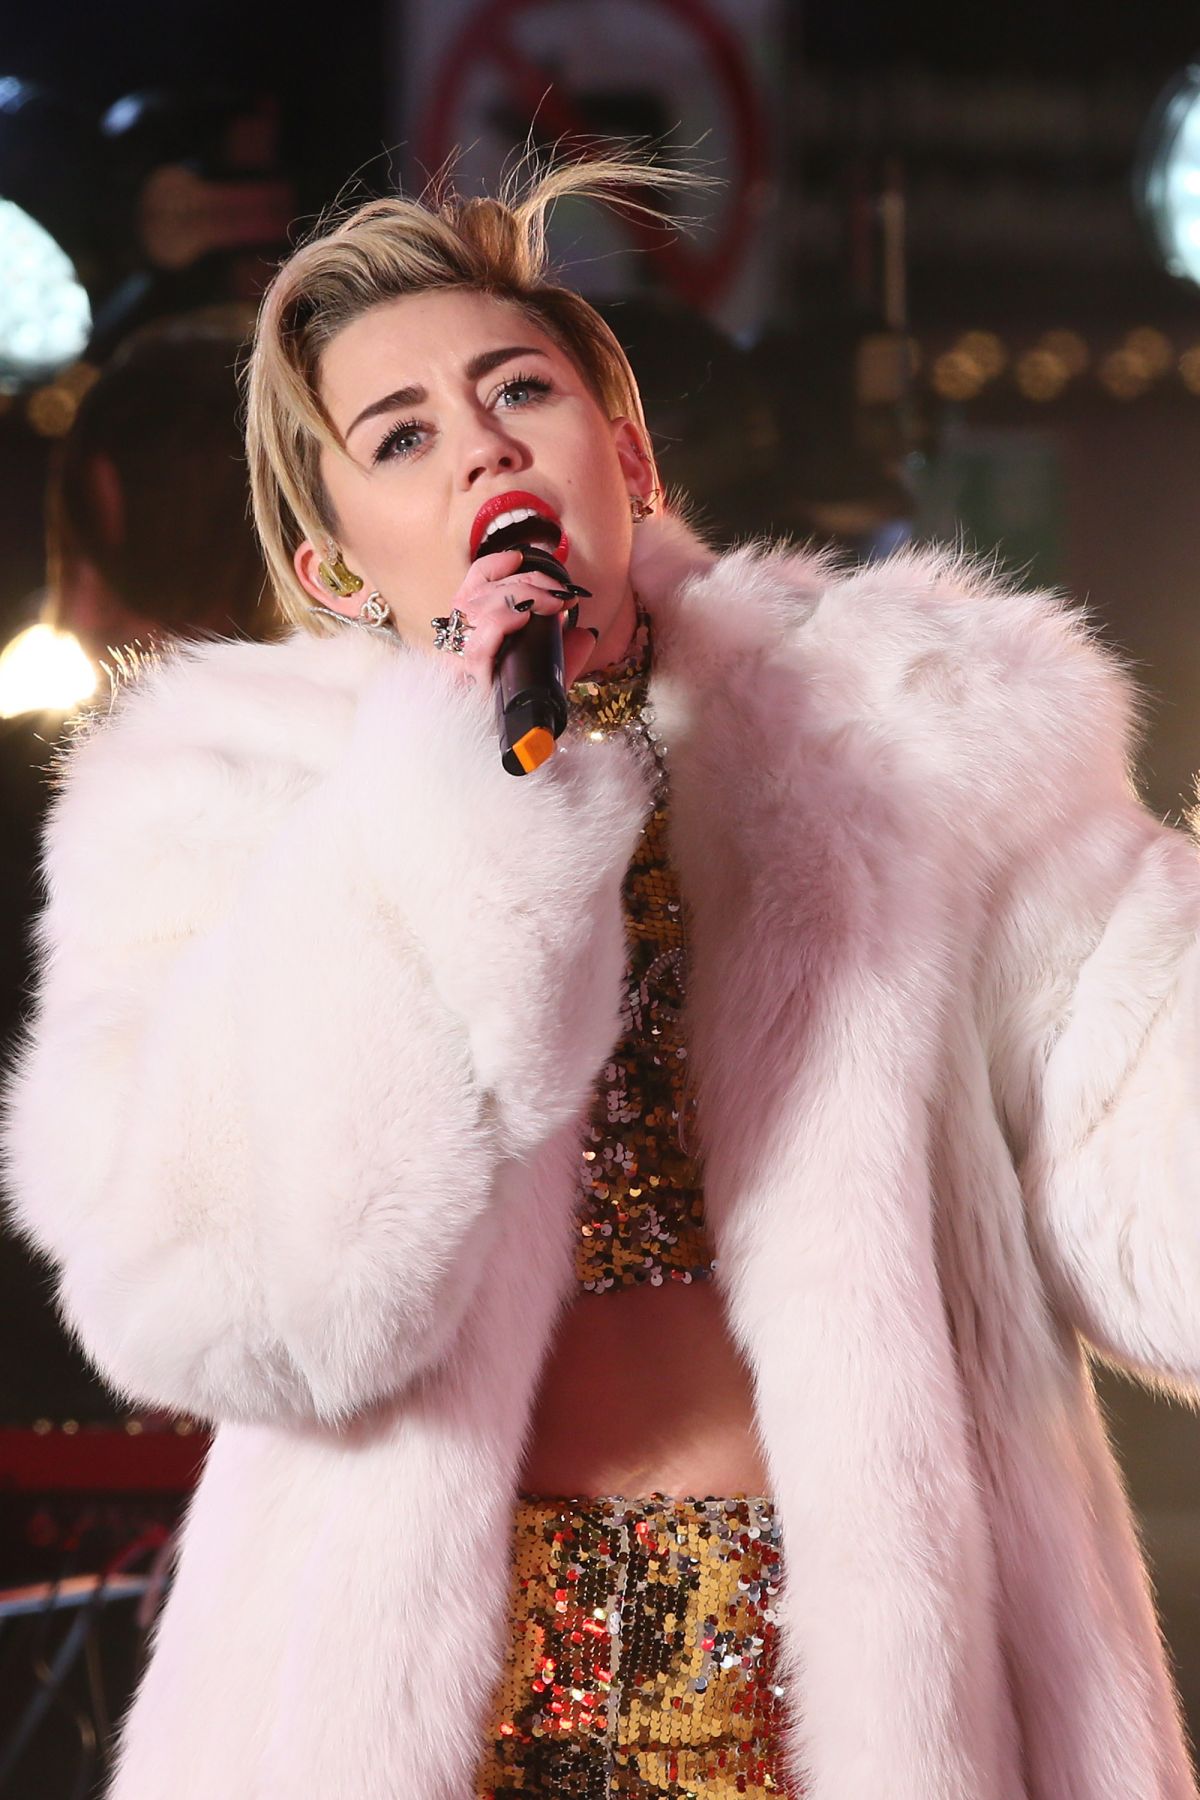 Miley Cyrus Performs At Dick Clark’s New Year’s Rockin’ Eve With Ryan